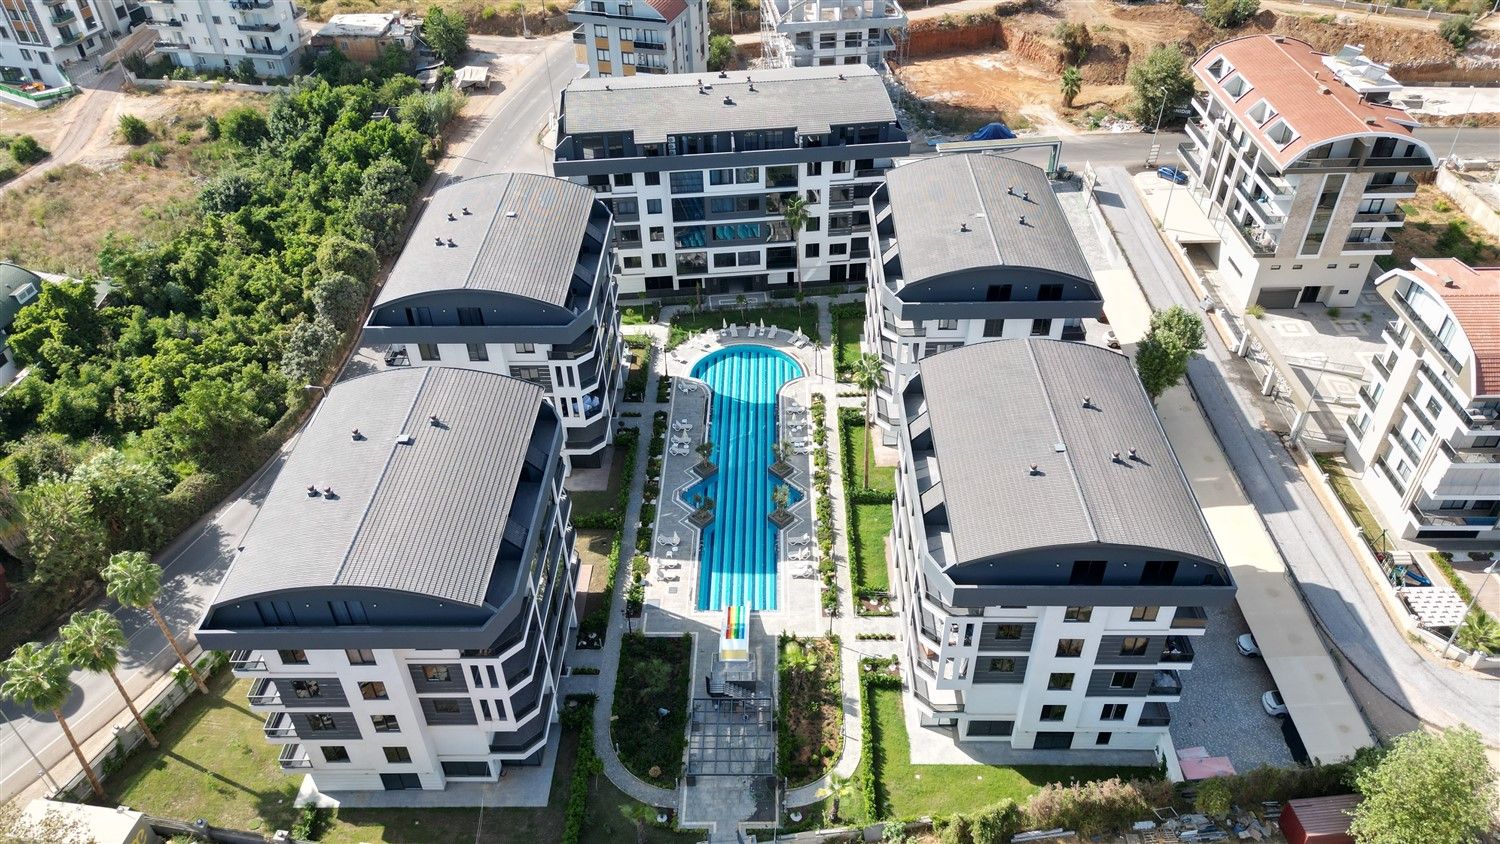 Apartments 1+1 and 2+1, residential complex surrounded by orange orchards